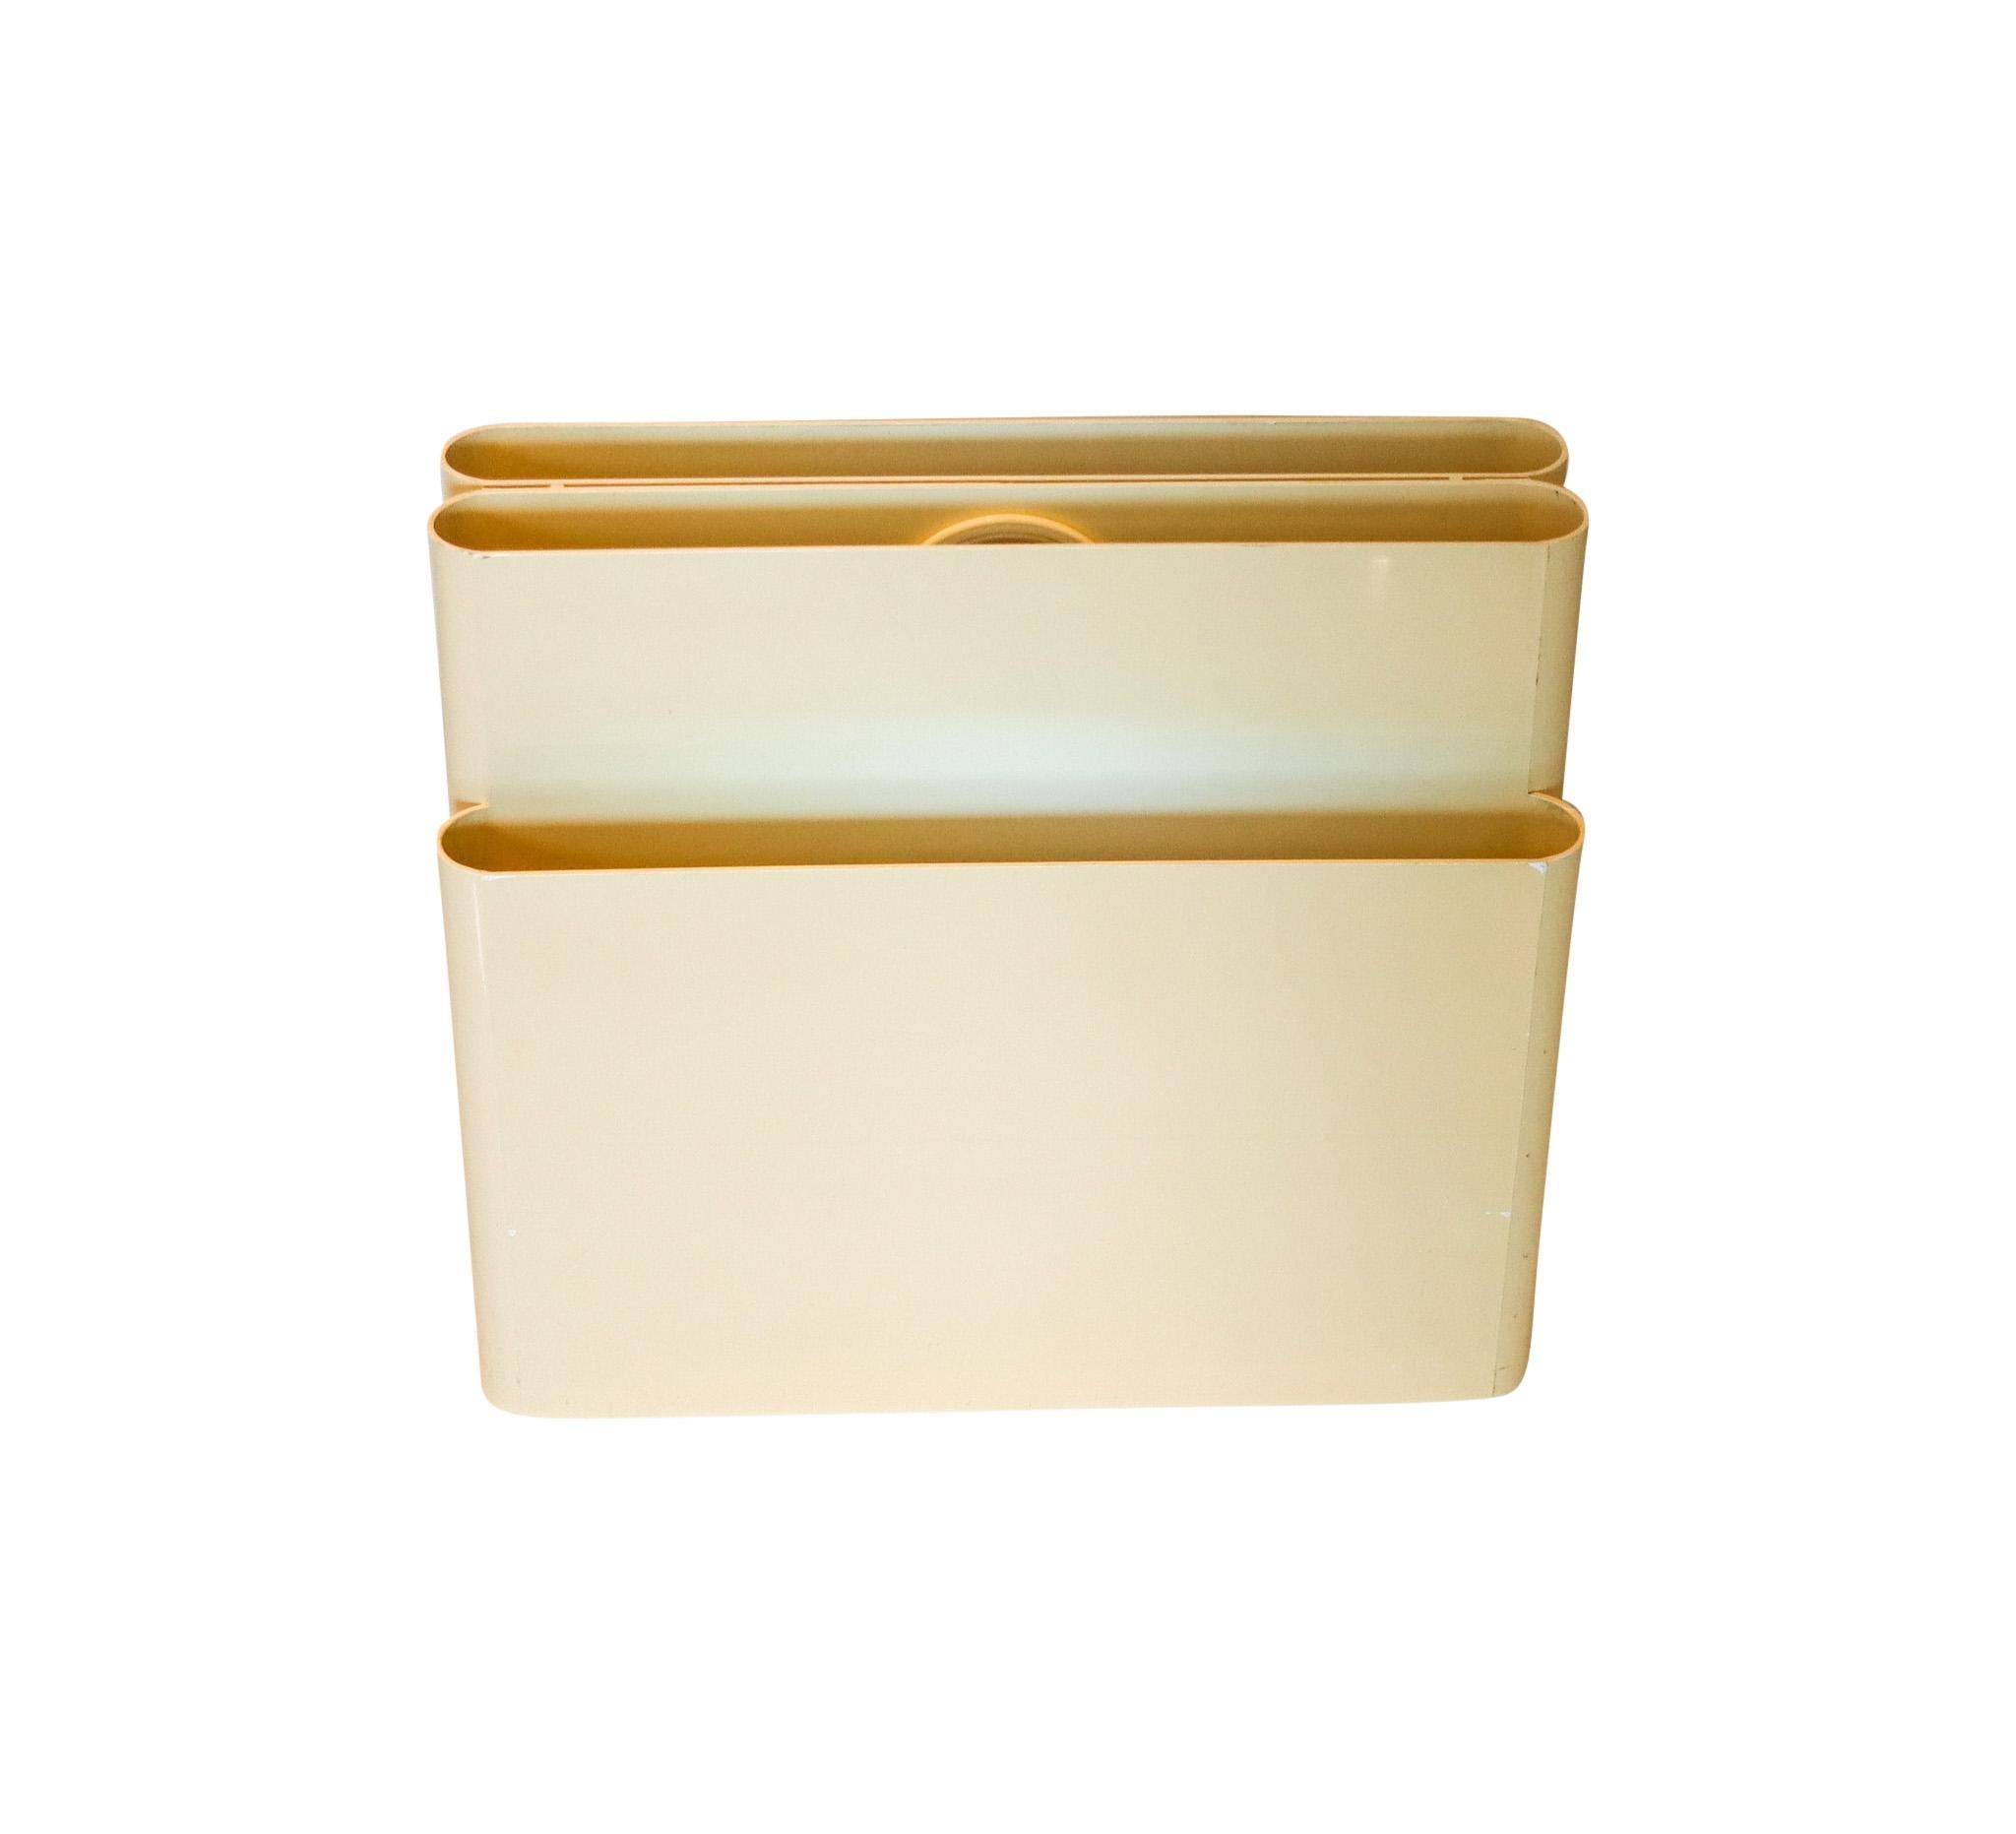 Polished Giotto Stoppino For Kartell 1970 Italian Magazine Holder In Cream Plastic For Sale